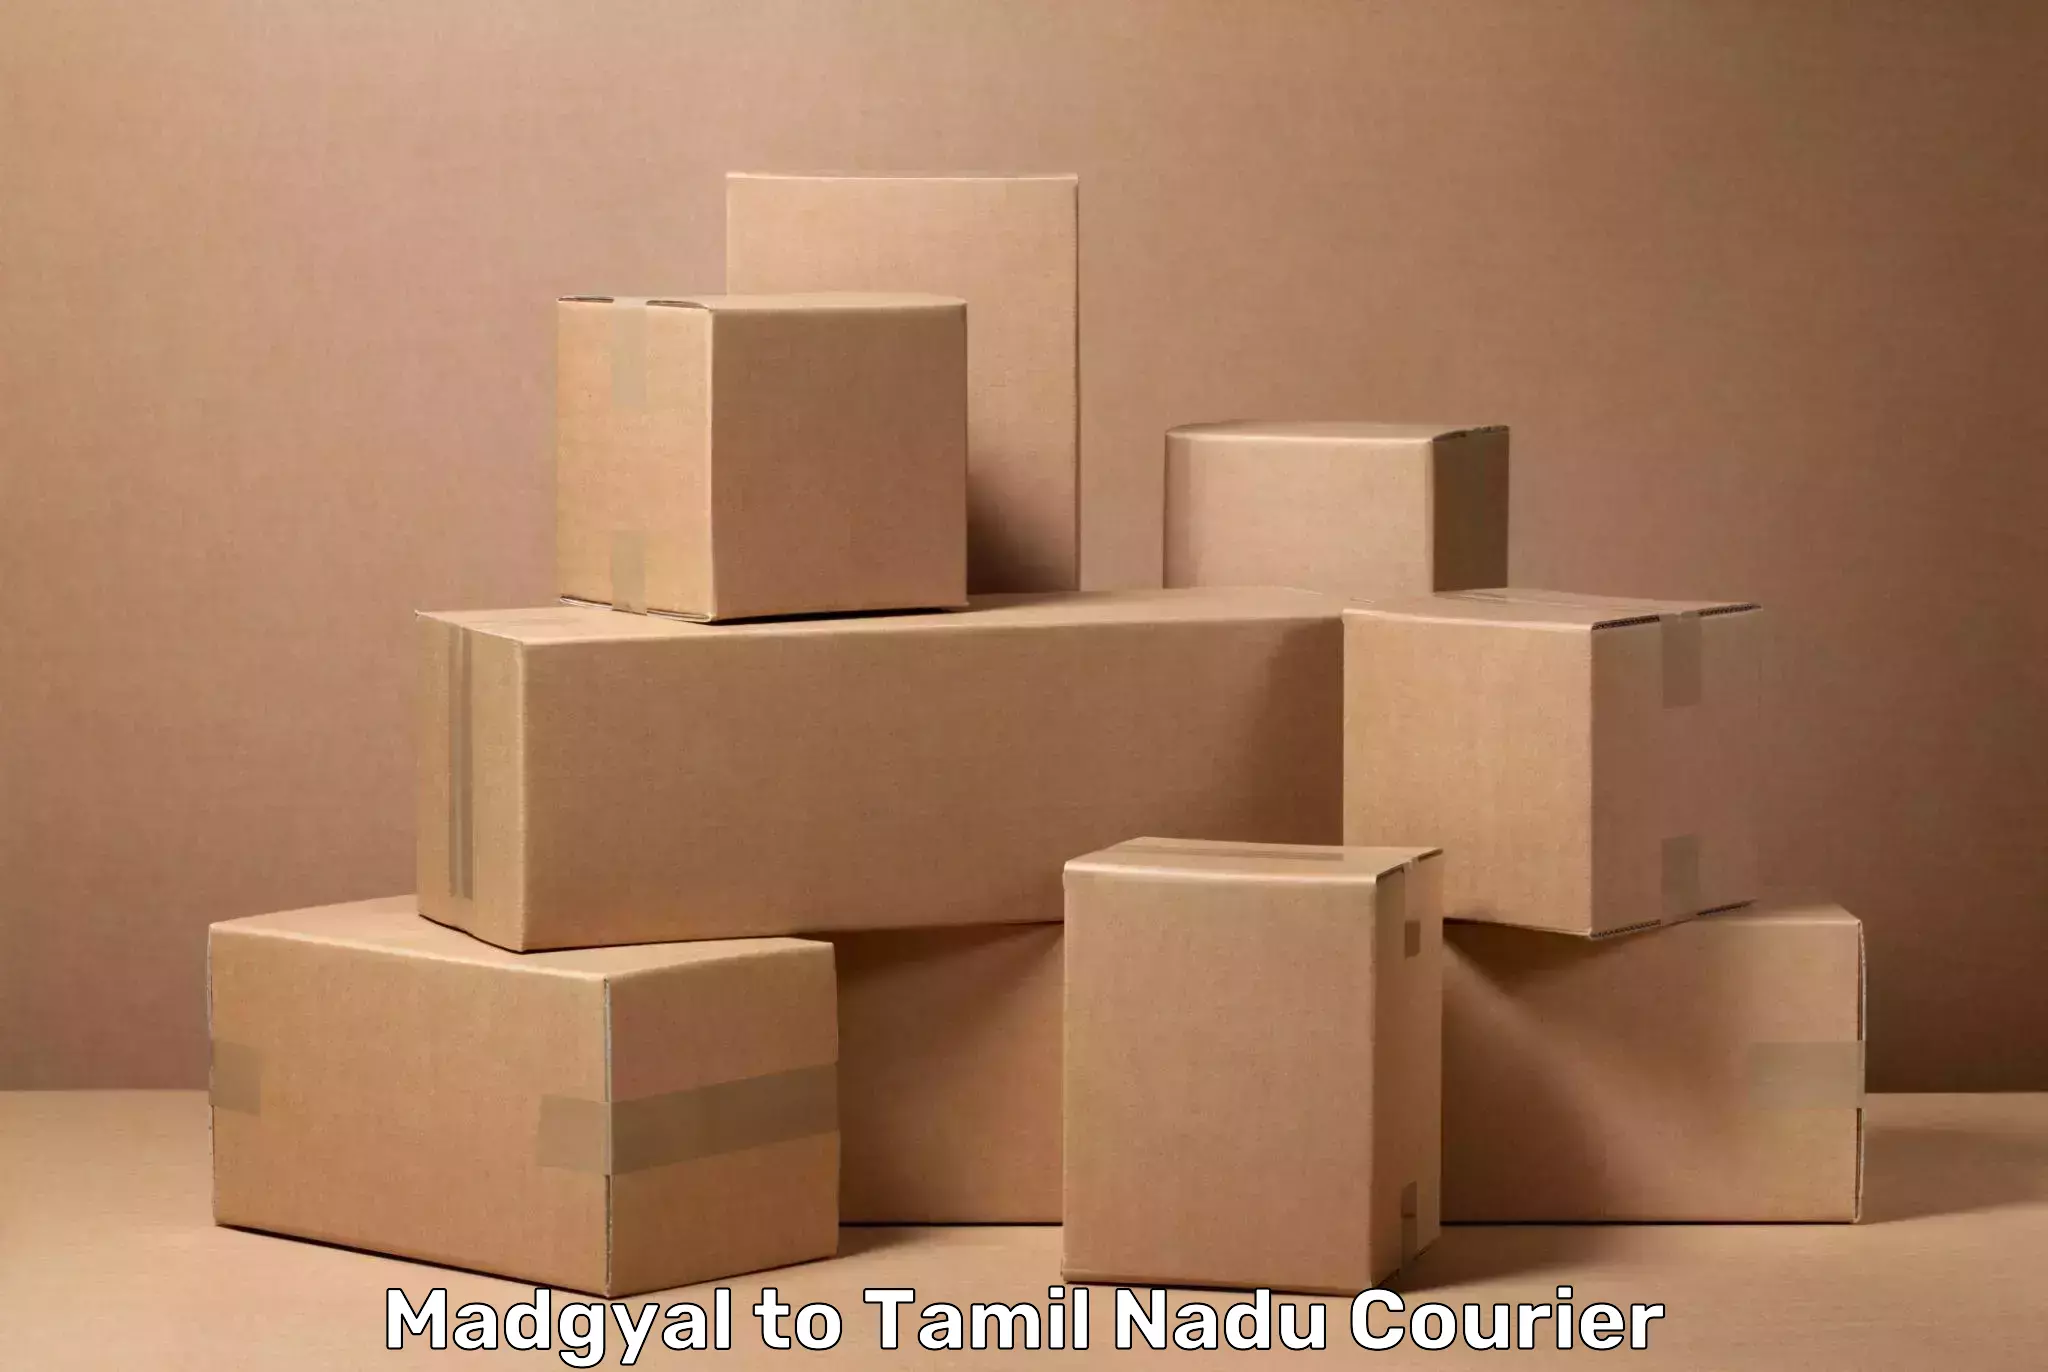 Instant baggage transport quote Madgyal to Kunnathur